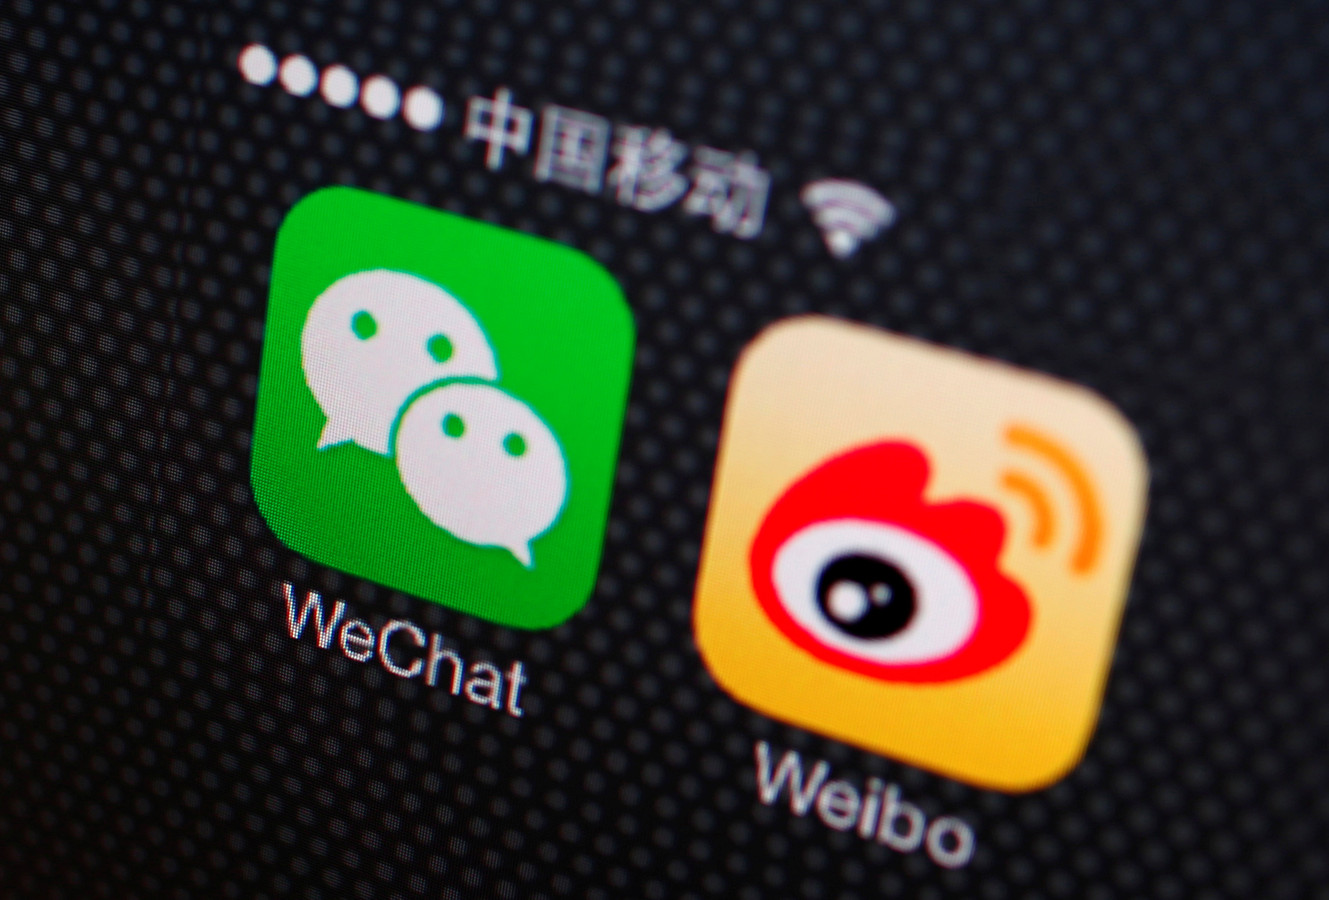 FILE PHOTO: Icons of WeChat and Weibo apps are seen on a smartphone in this picture illustration taken December 5, 2013. REUTERS/Petar Kujundzic/Illustration/File Photo